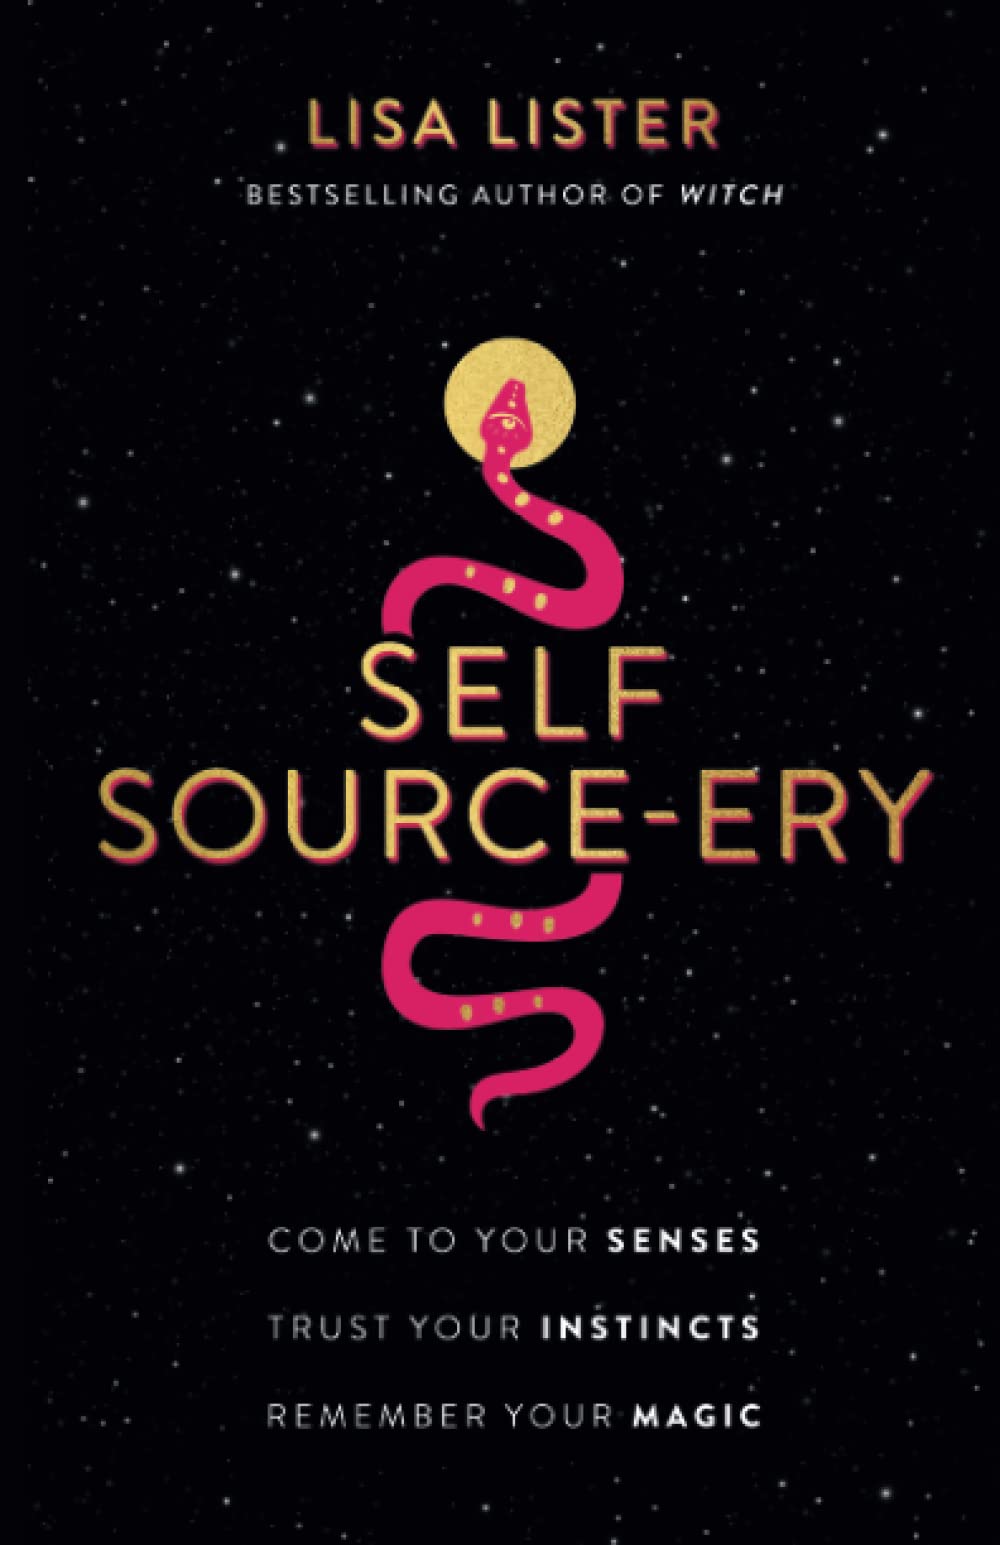 Self Source-ery: Come to Your Senses. Trust Your Instincts. Remember Your Magic